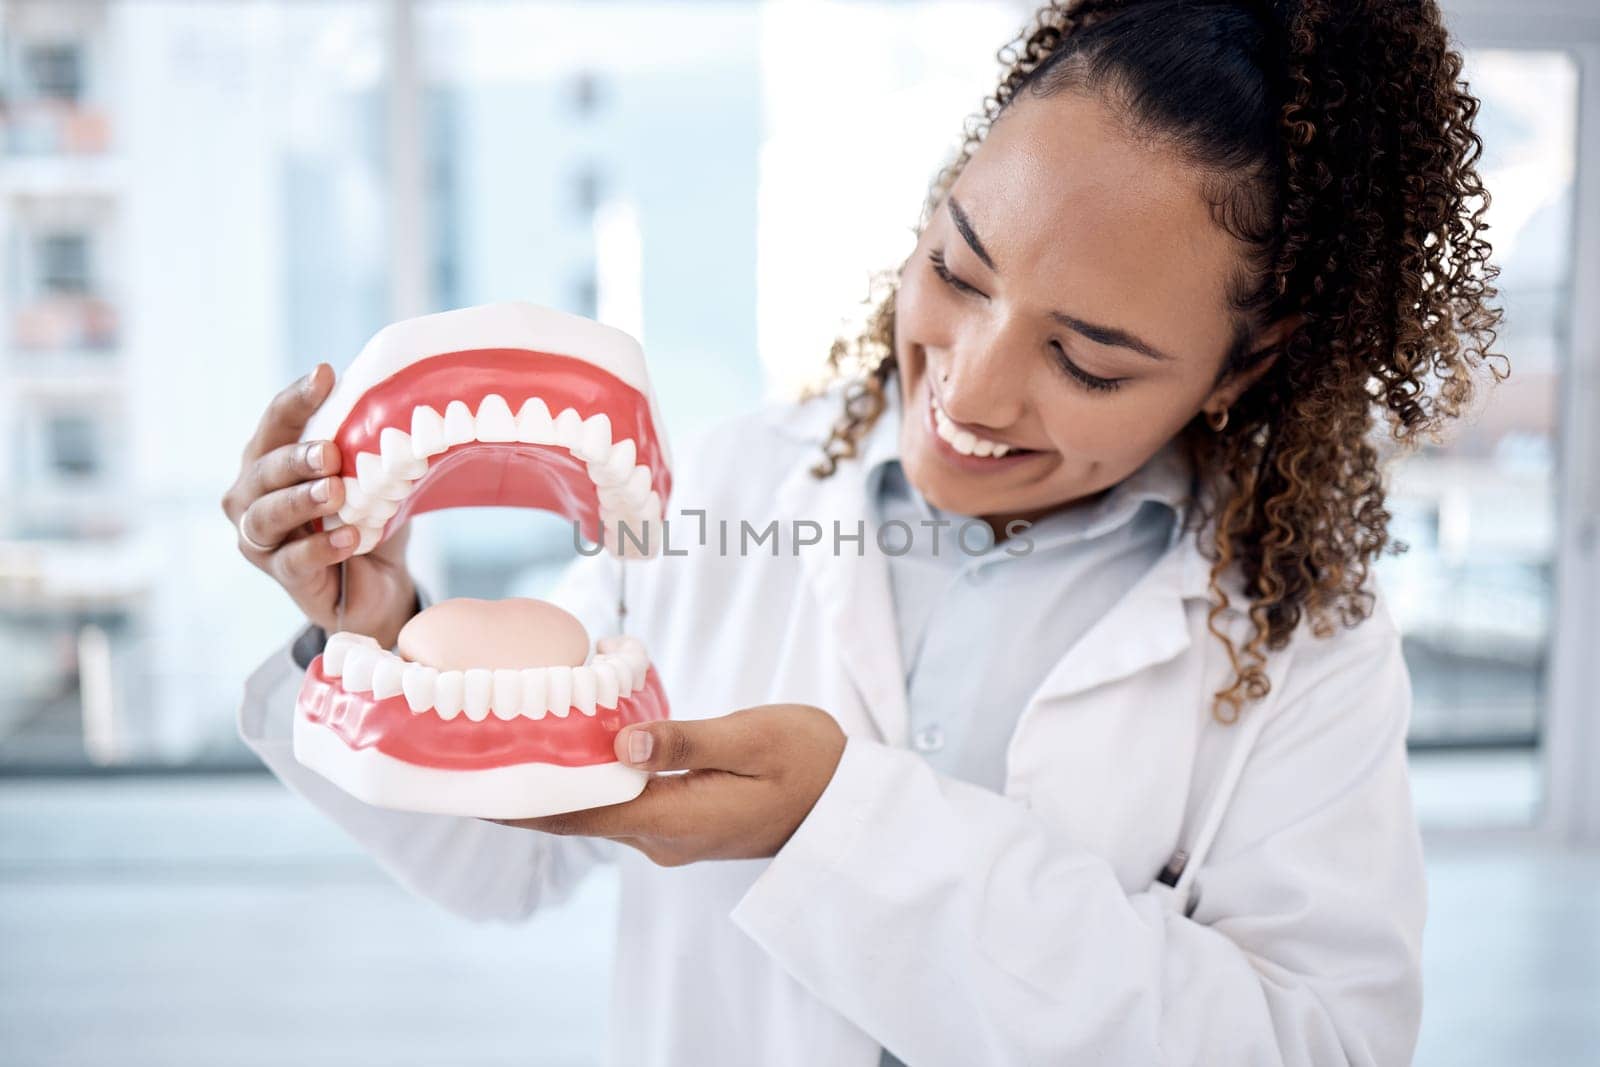 Dentist, oral and dental hygiene professional artificial mouth or model in her office for a demonstration of whitening. Dentures, jaw and healthcare worker or expert holding teeth smile and happy.